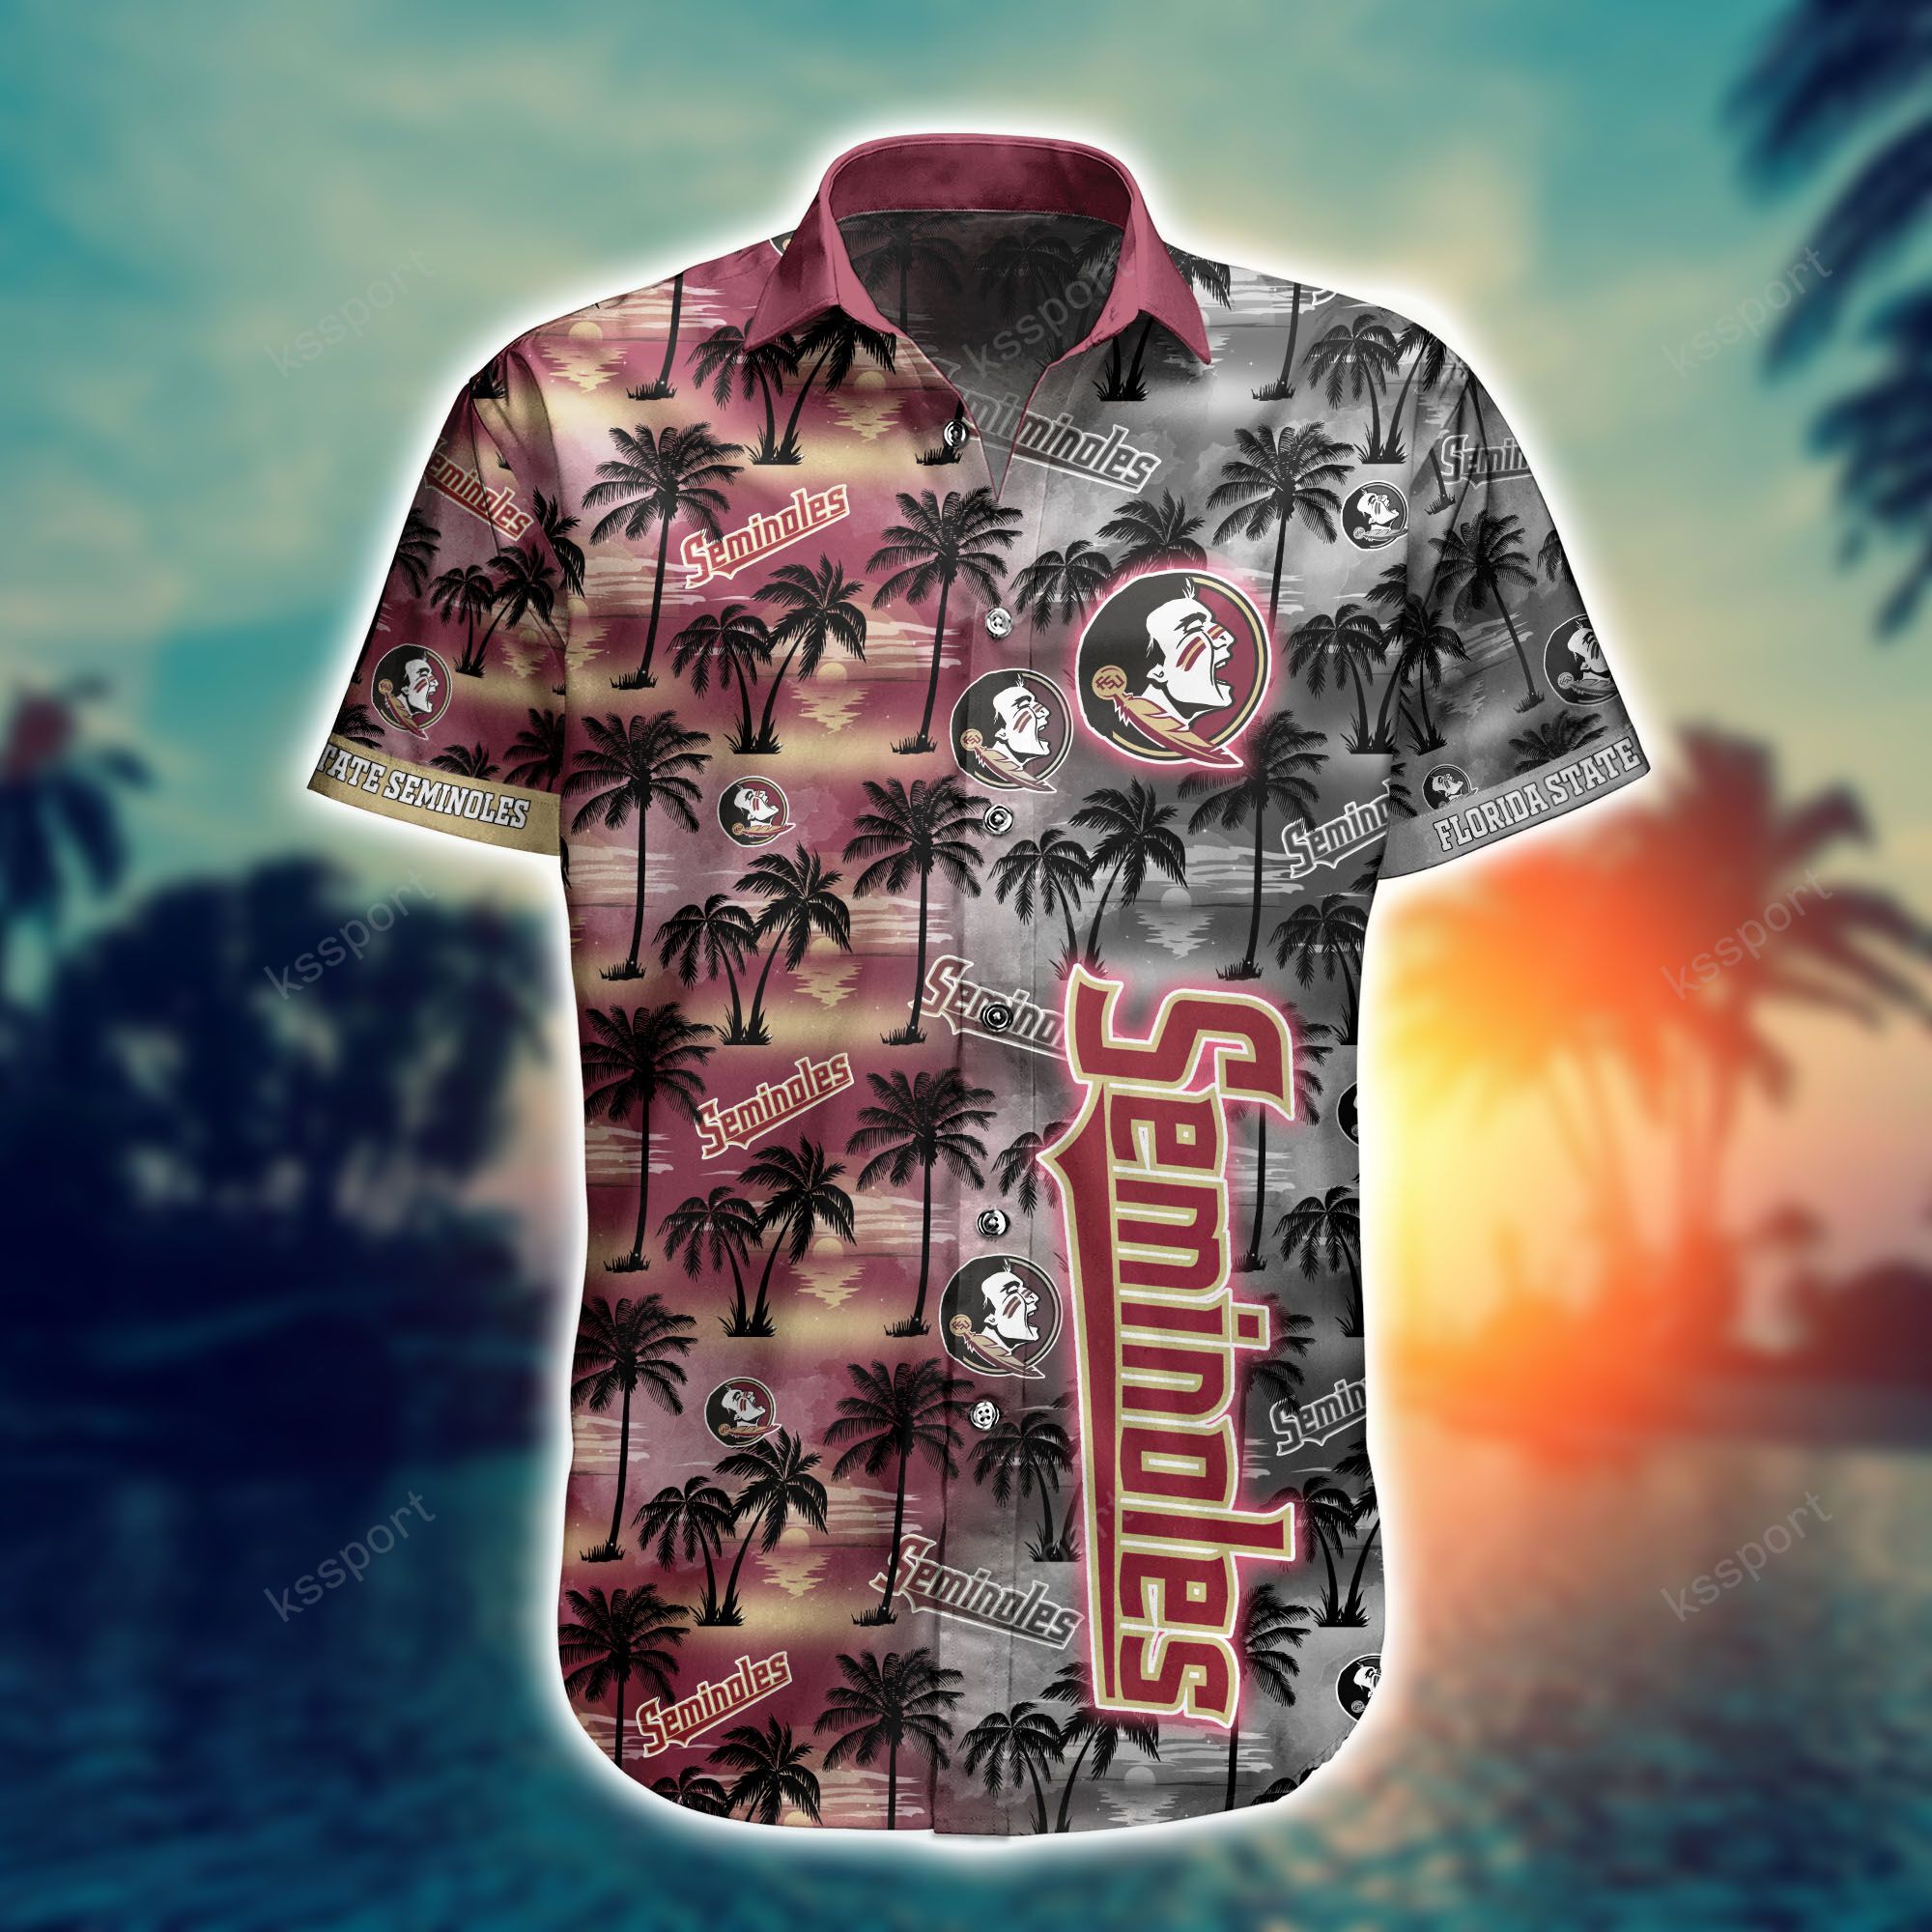 Top cool Hawaiian shirt 2022 - Make sure you get yours today before they run out! 134